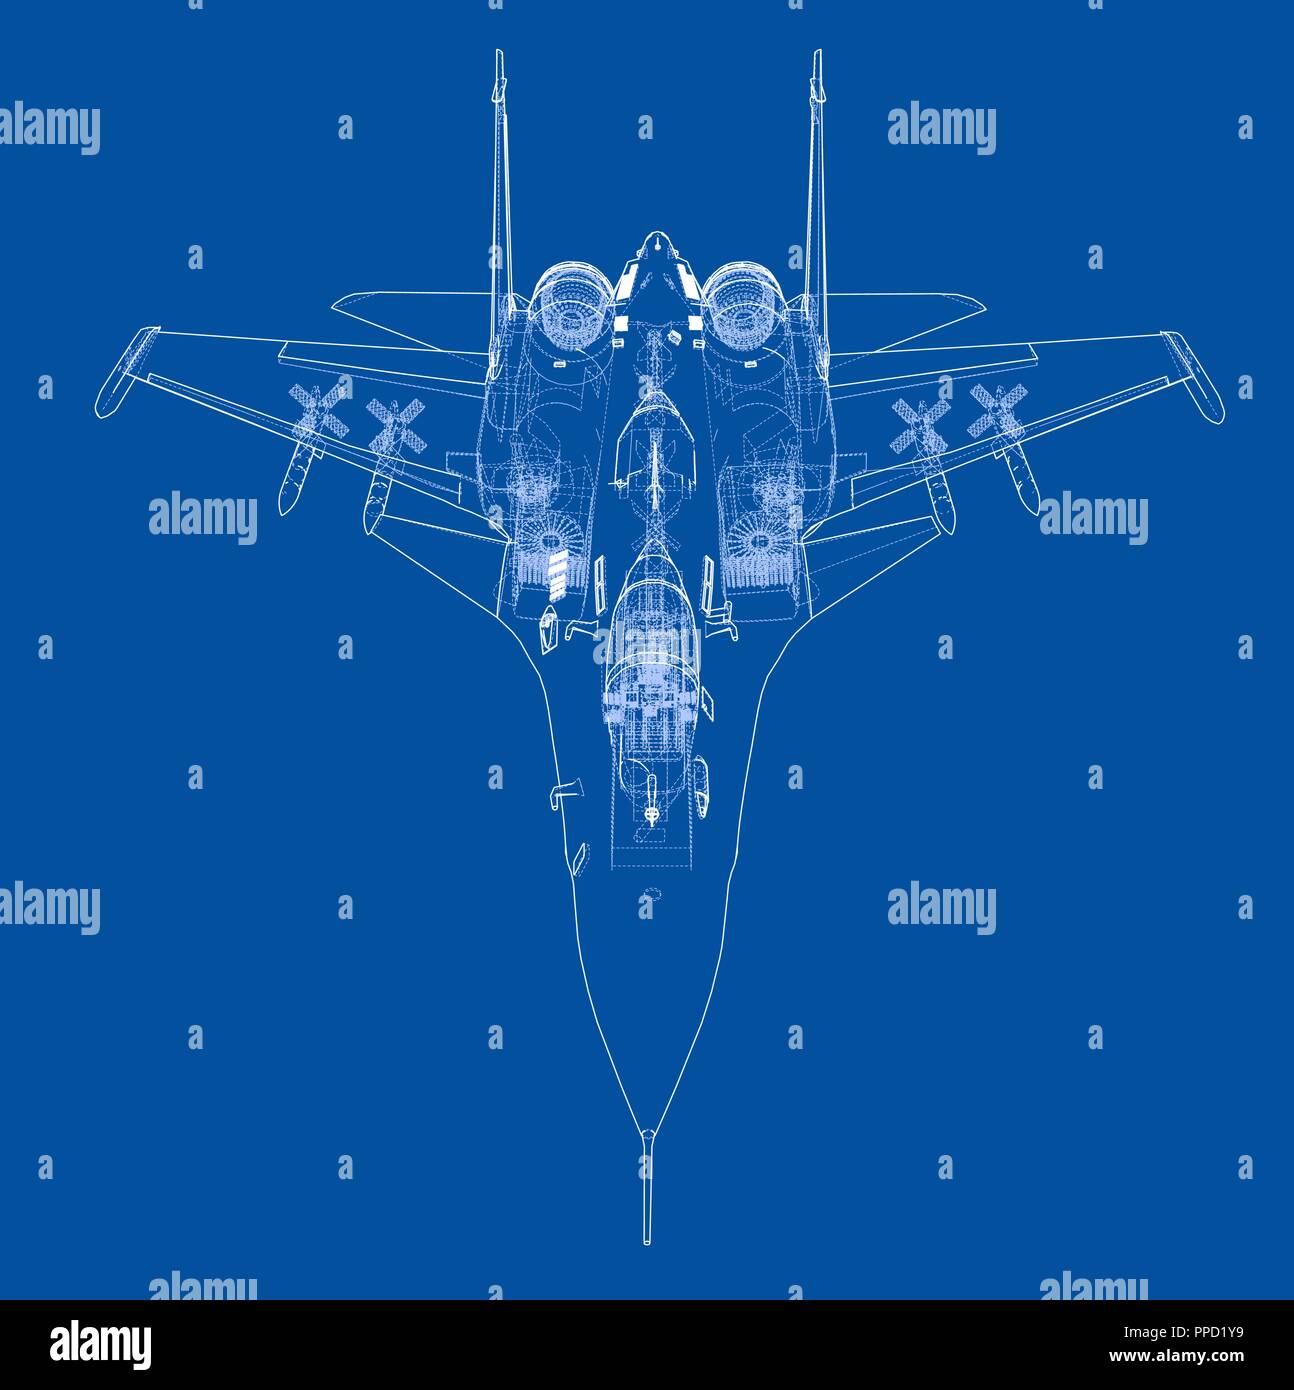 Fighter plane concept Stock Vector